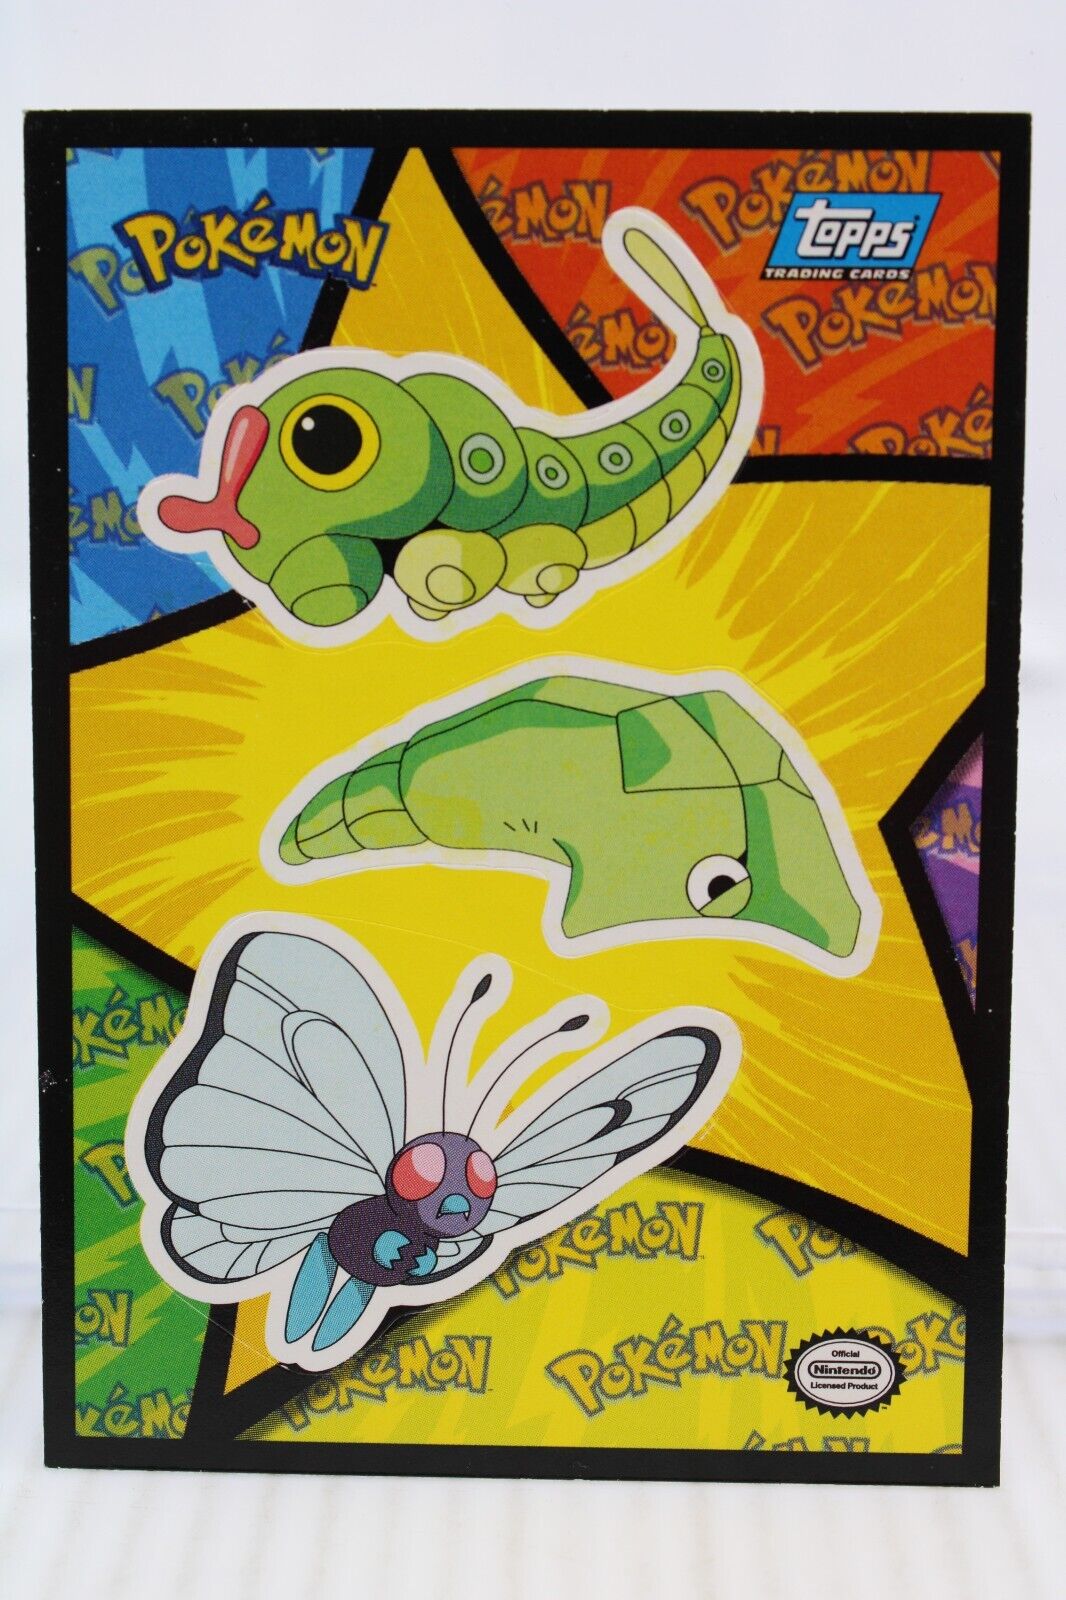 A6 Topps Pokemon Sticker Card The First Movie Caterpie, Metapod and Butterfree